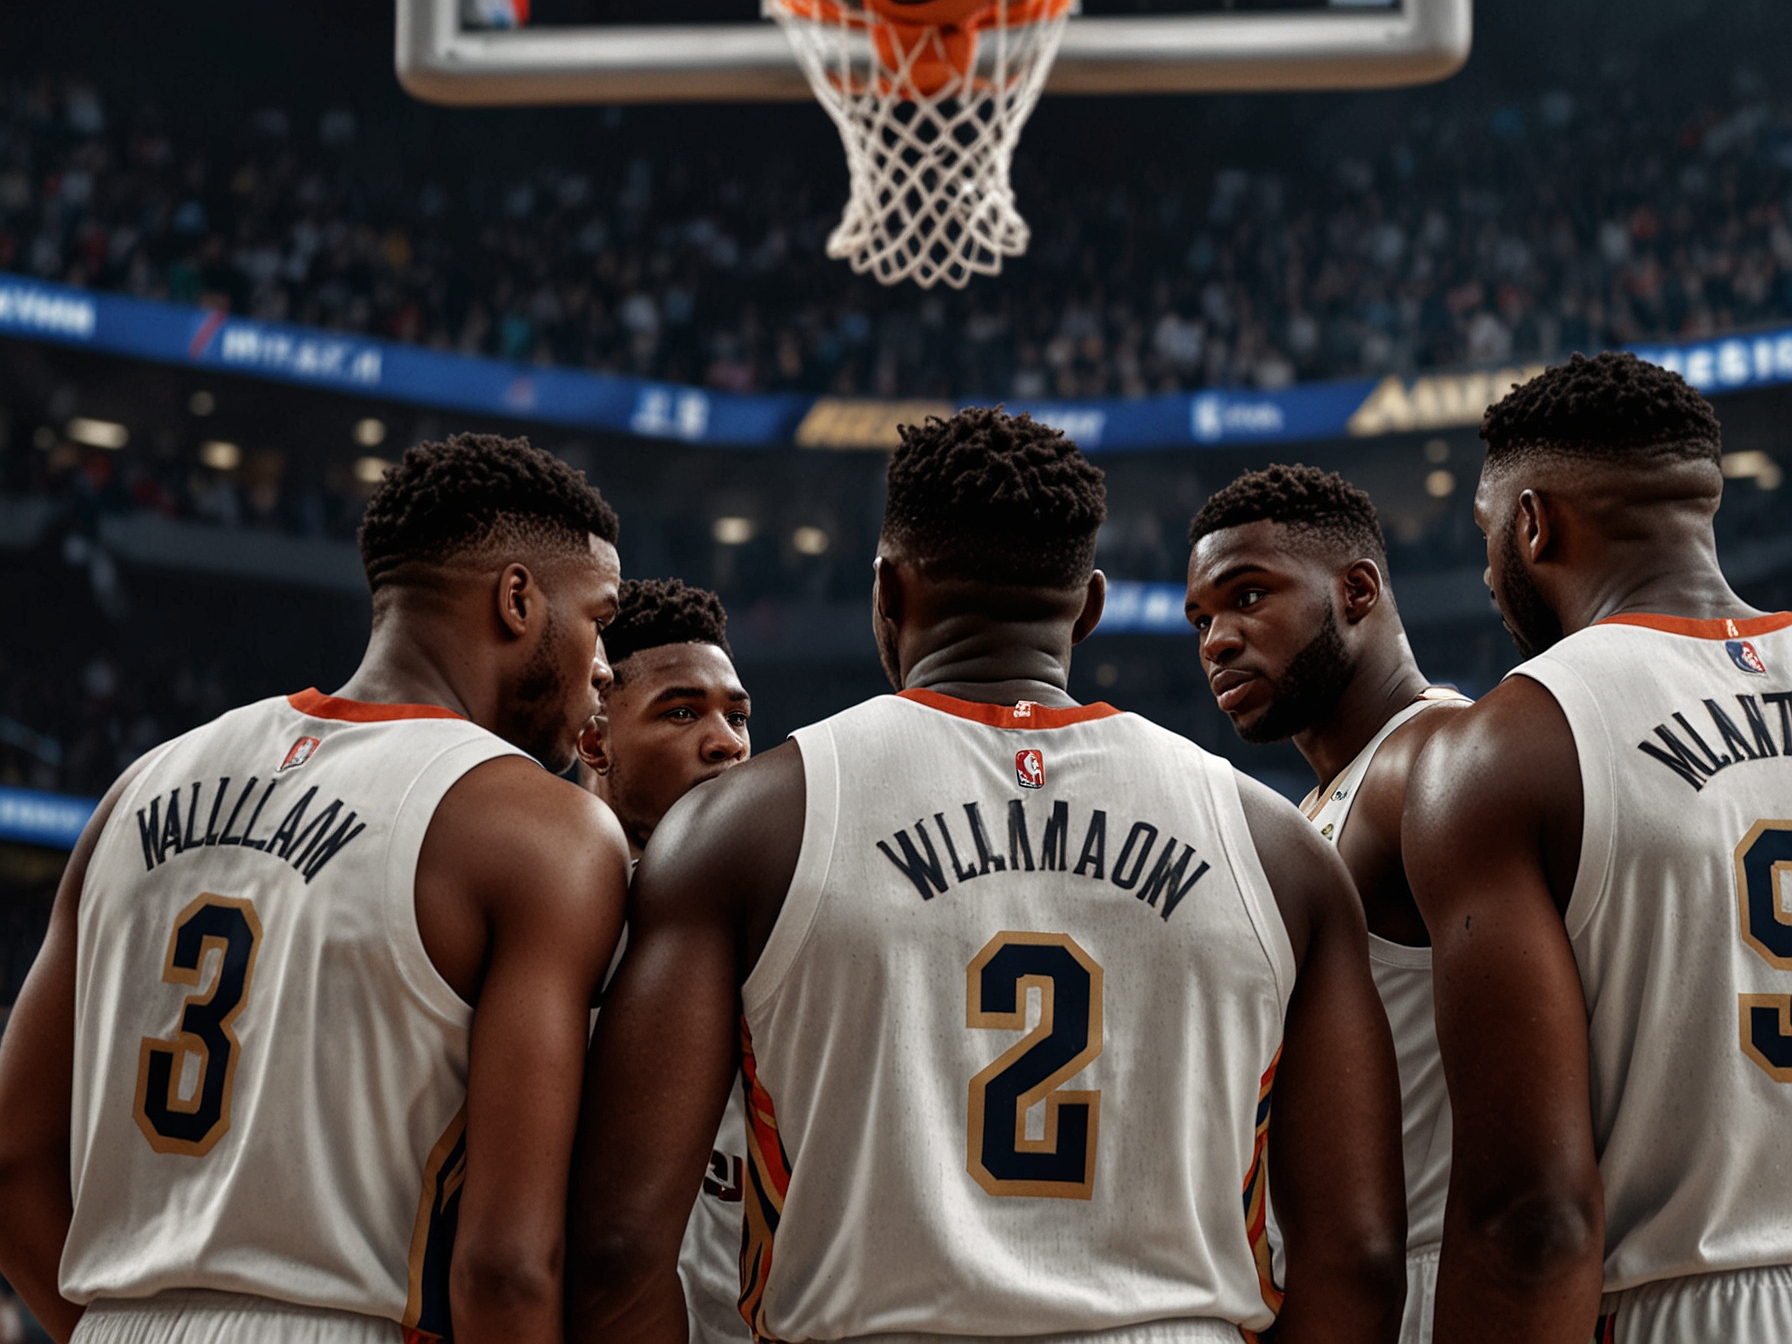 Pelicans' team huddle during a game, showcasing both veteran and young players like Zion Williamson, symbolizing the team's focus on building a cohesive, future-ready unit.